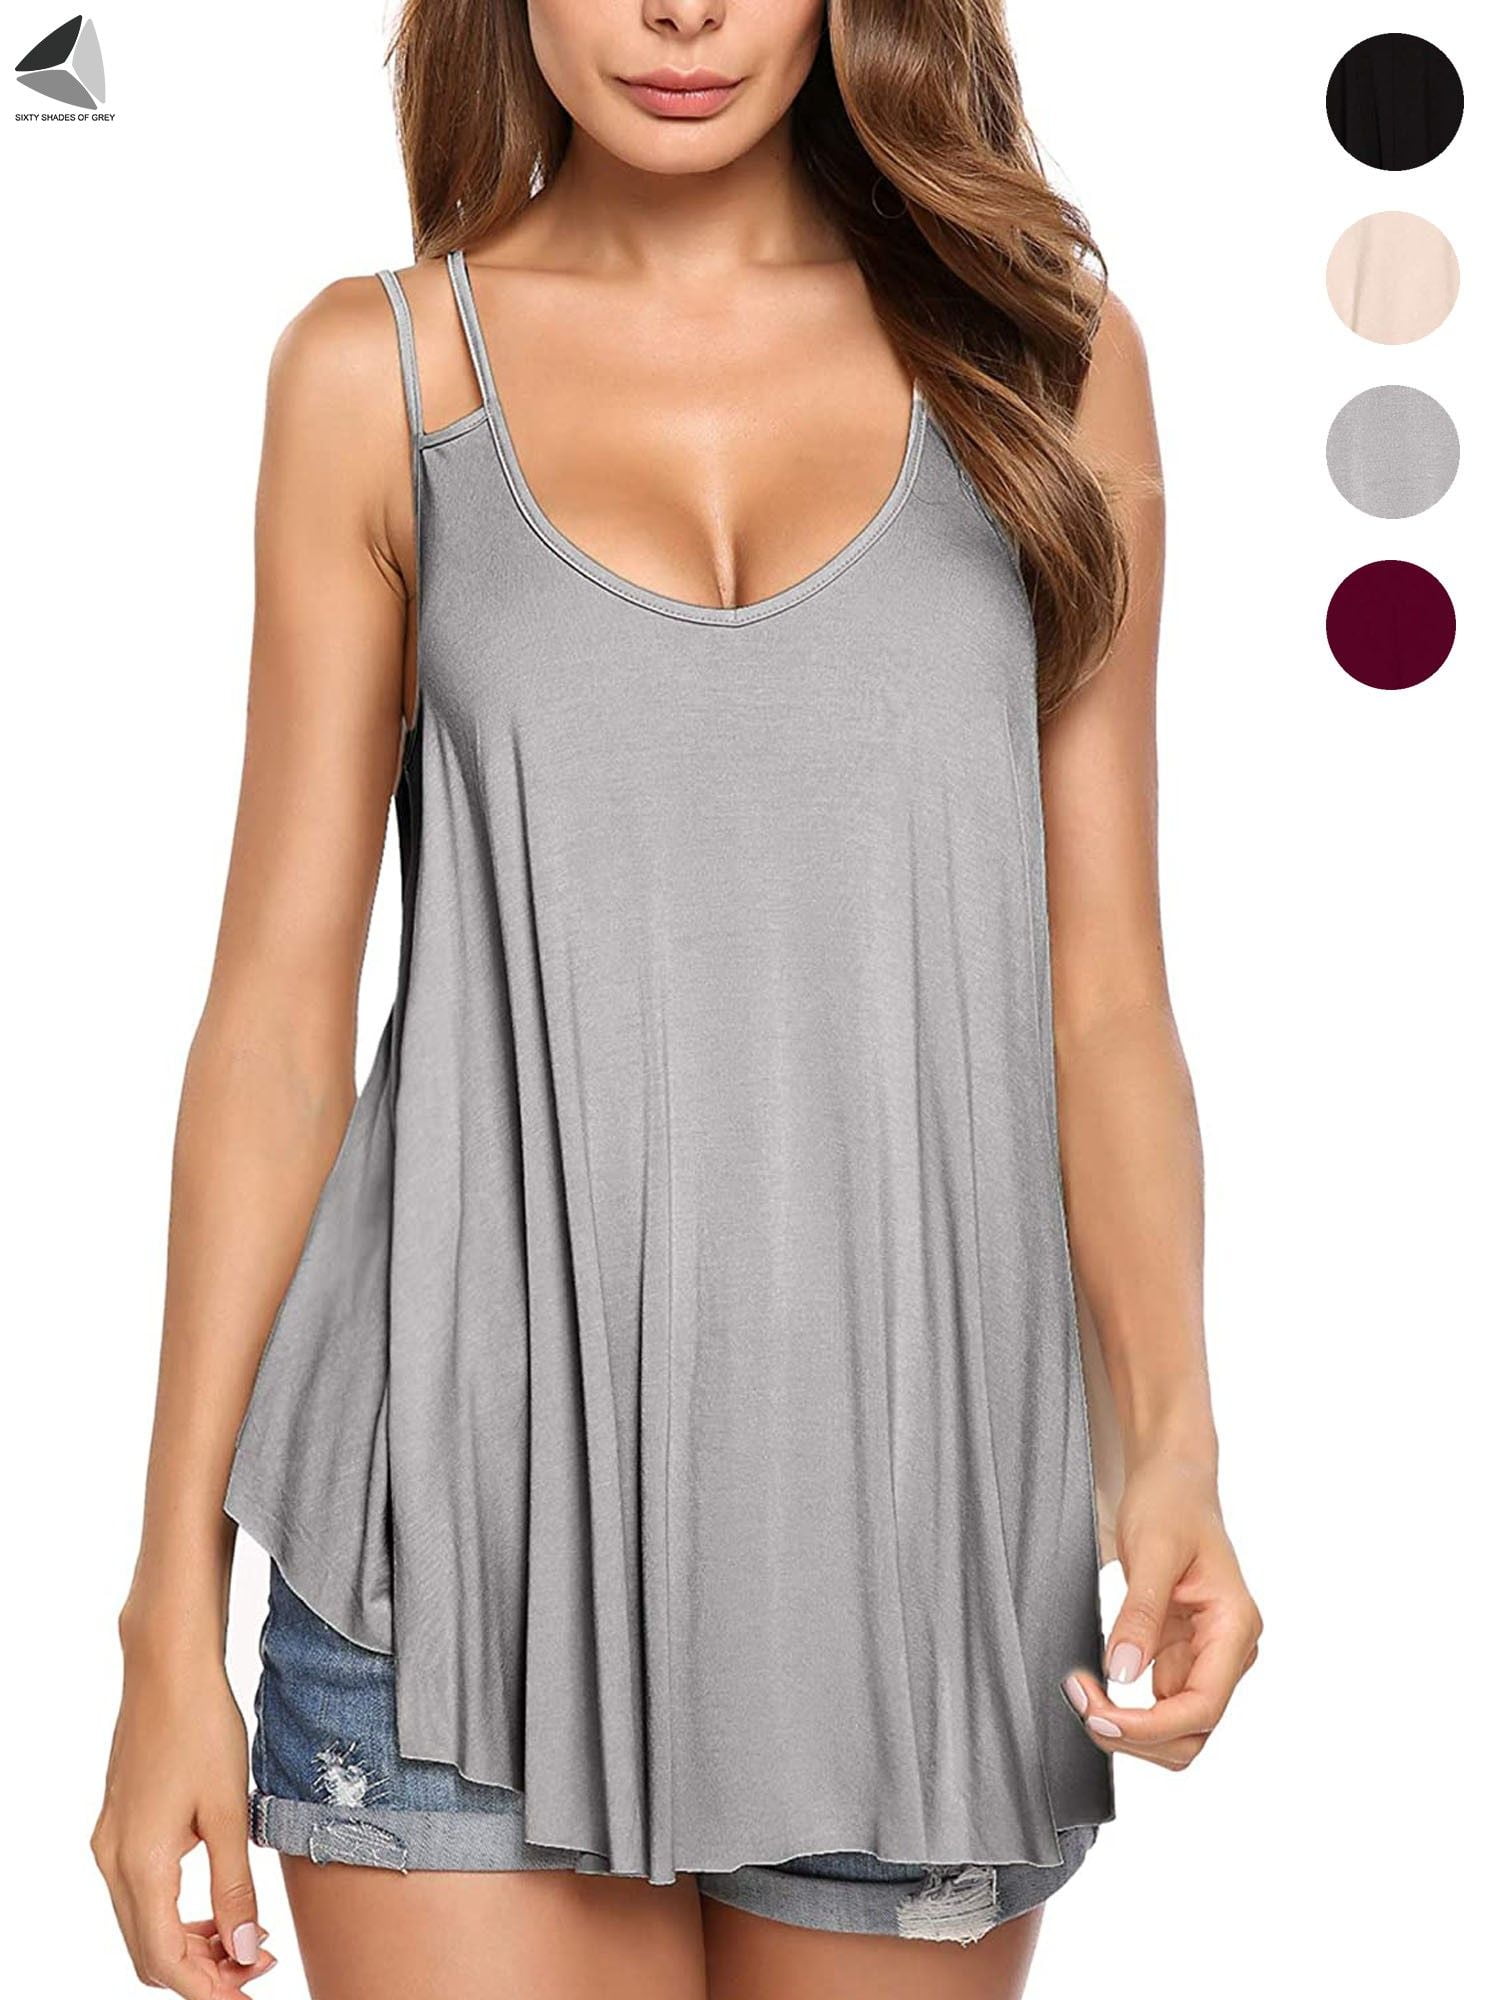 PULLIMORE Womens Flowy Summer Cami Tops V Neck Double Spaghetti Strap Tank  Top Camisole Shirts (XL, Gray)